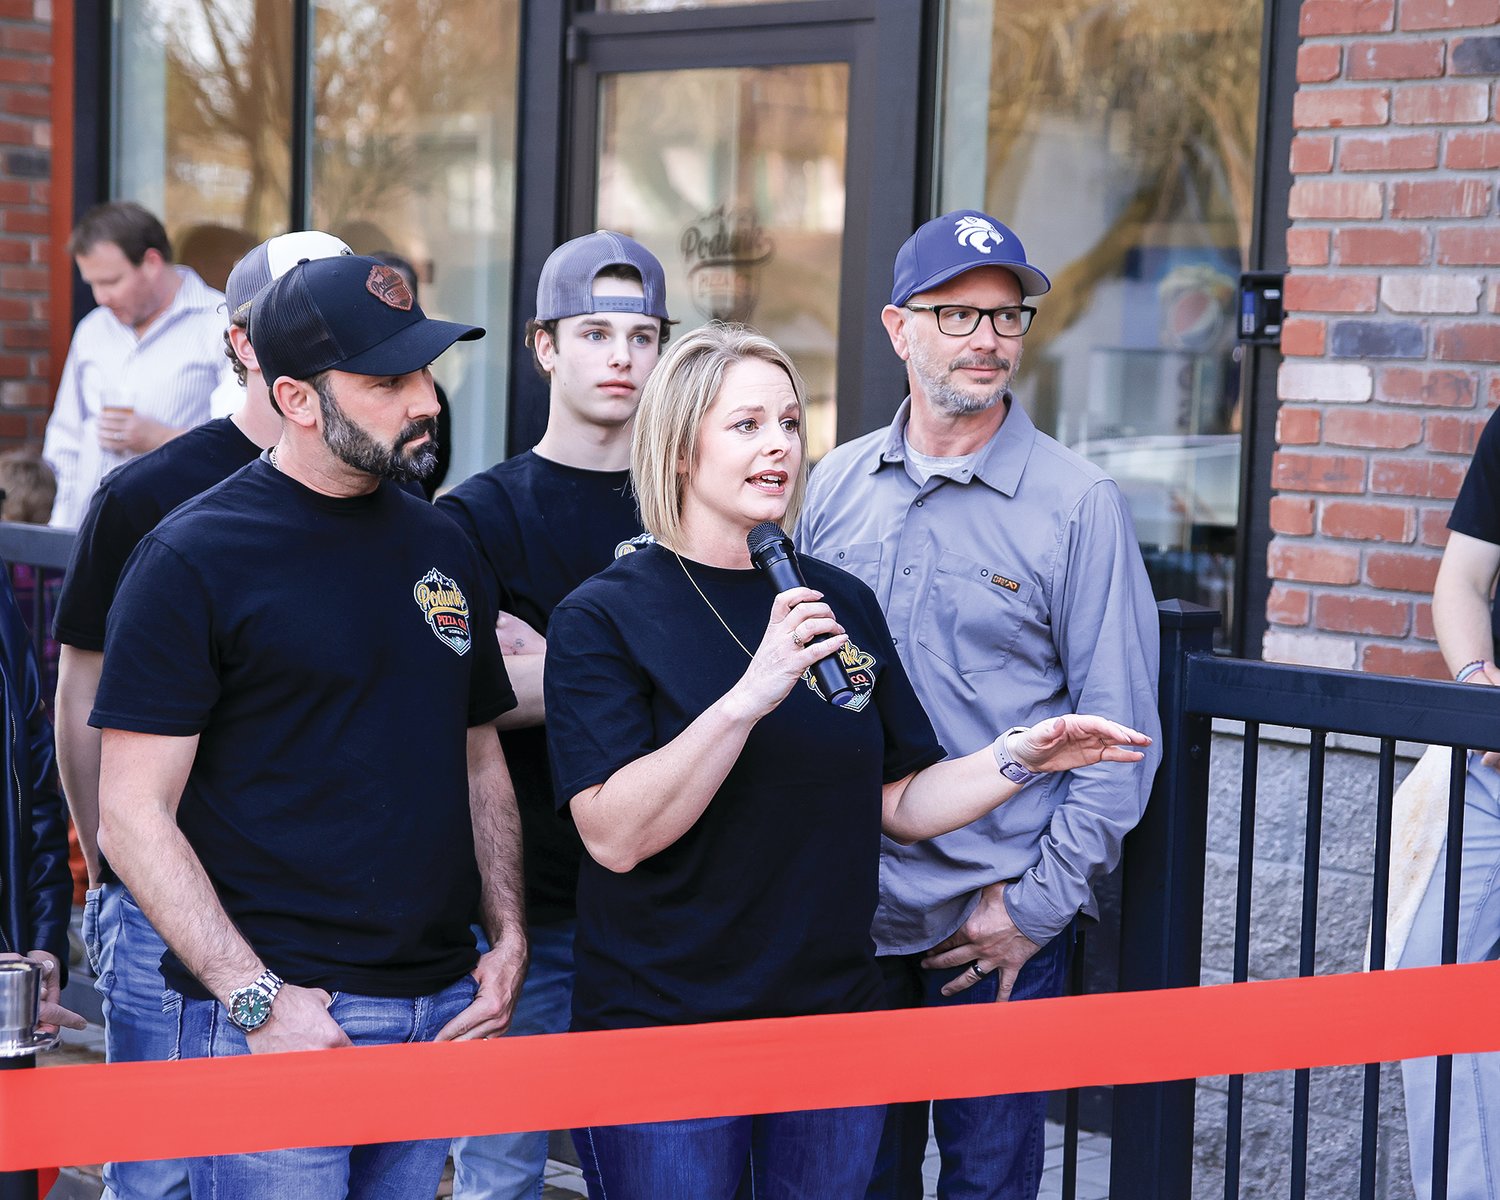 Owner Tosha Emerson speaks to the large crowd gathered to celebrate Podunk Pizza Co.’s ribbon-cutting and grand opening event on Saturday, March 18 in La Center.